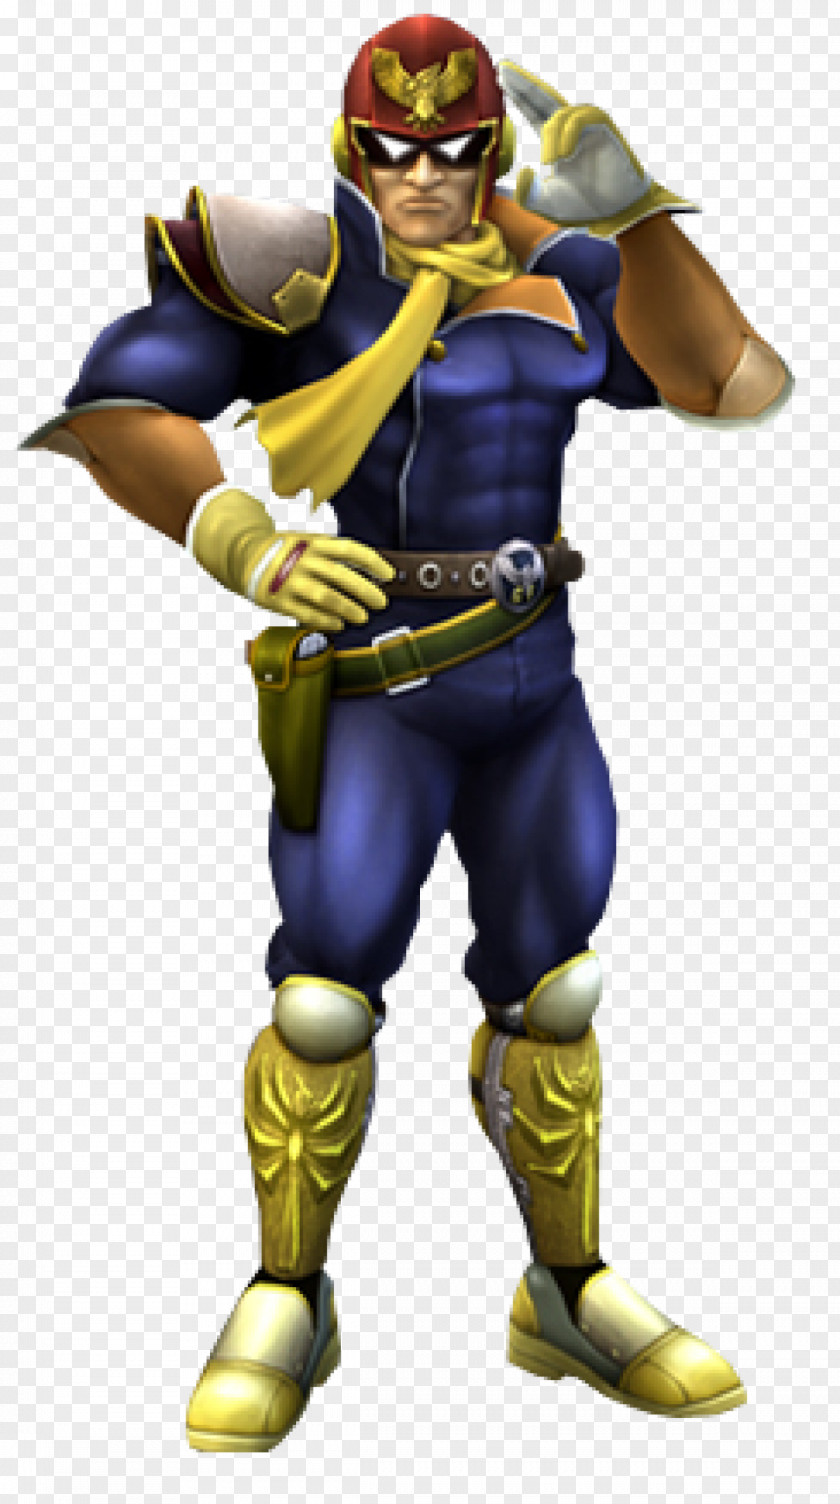 Falcon Super Smash Bros. Brawl Melee For Nintendo 3DS And Wii U F-Zero Project M PNG